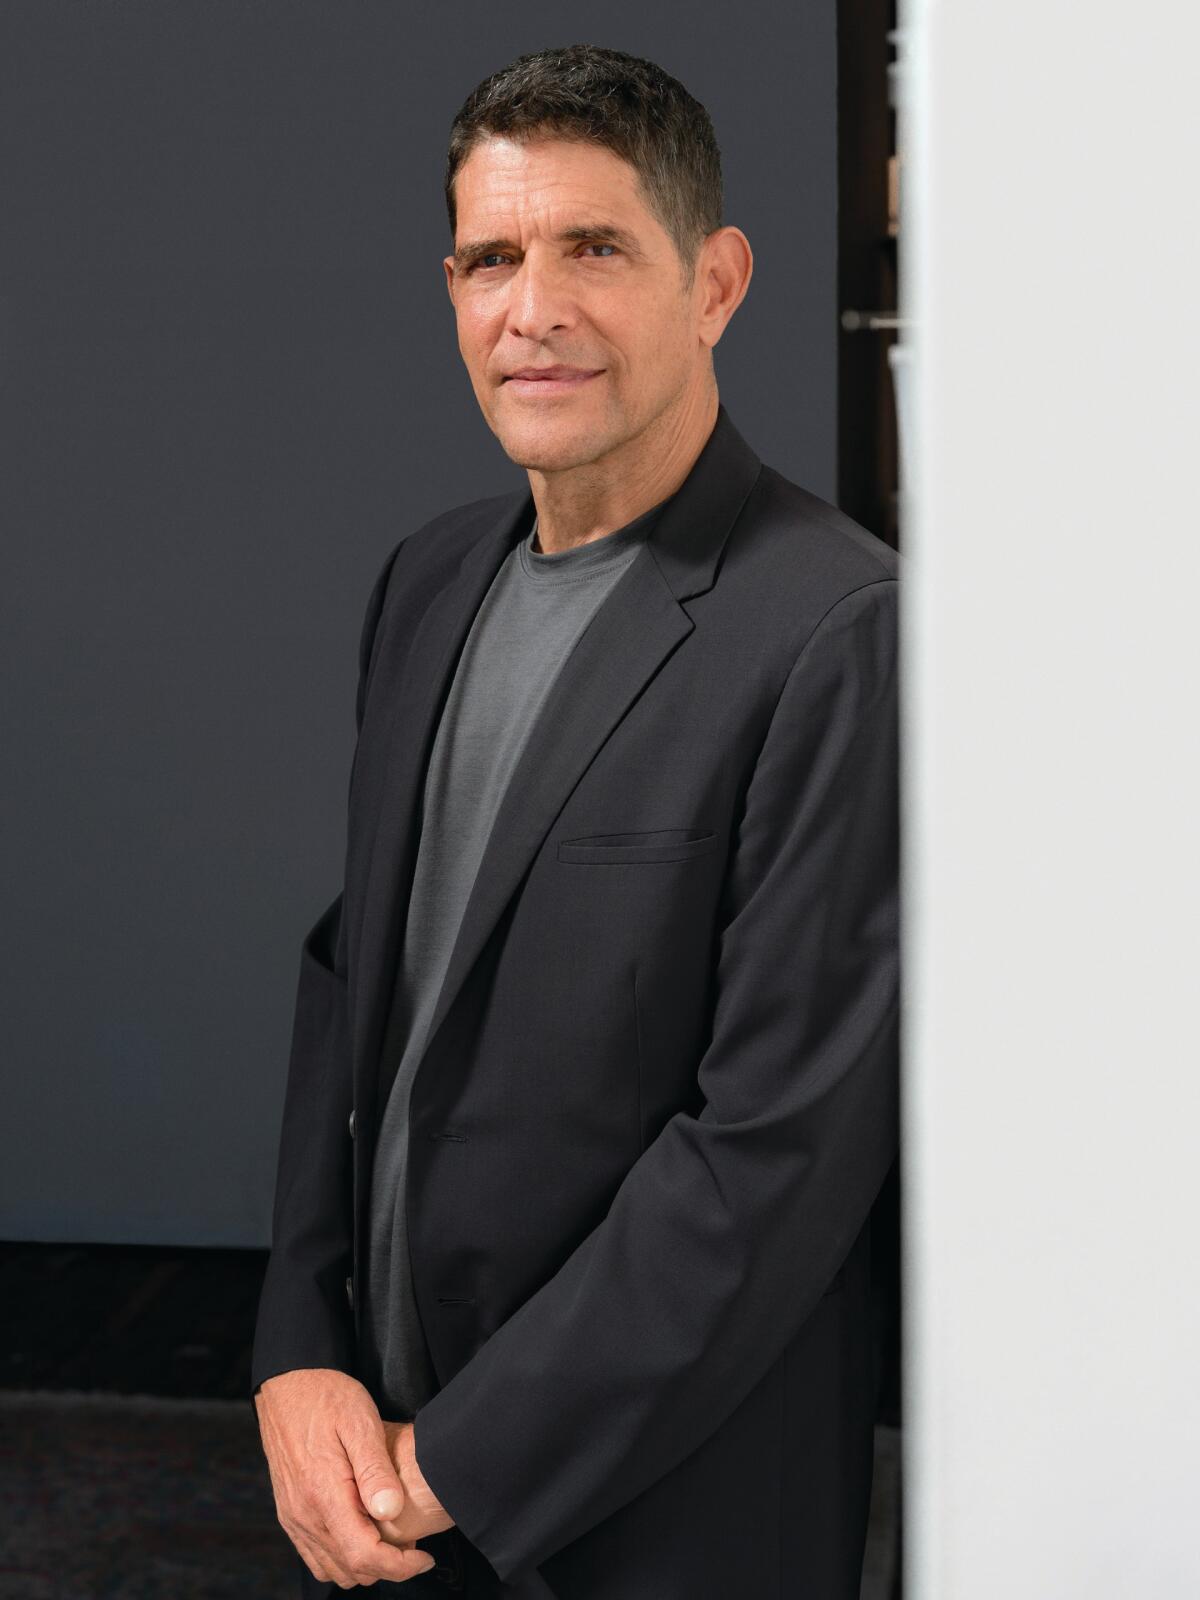 A dark-haired man wearing a dark jacket over a gray t-shirt stands against a wall.